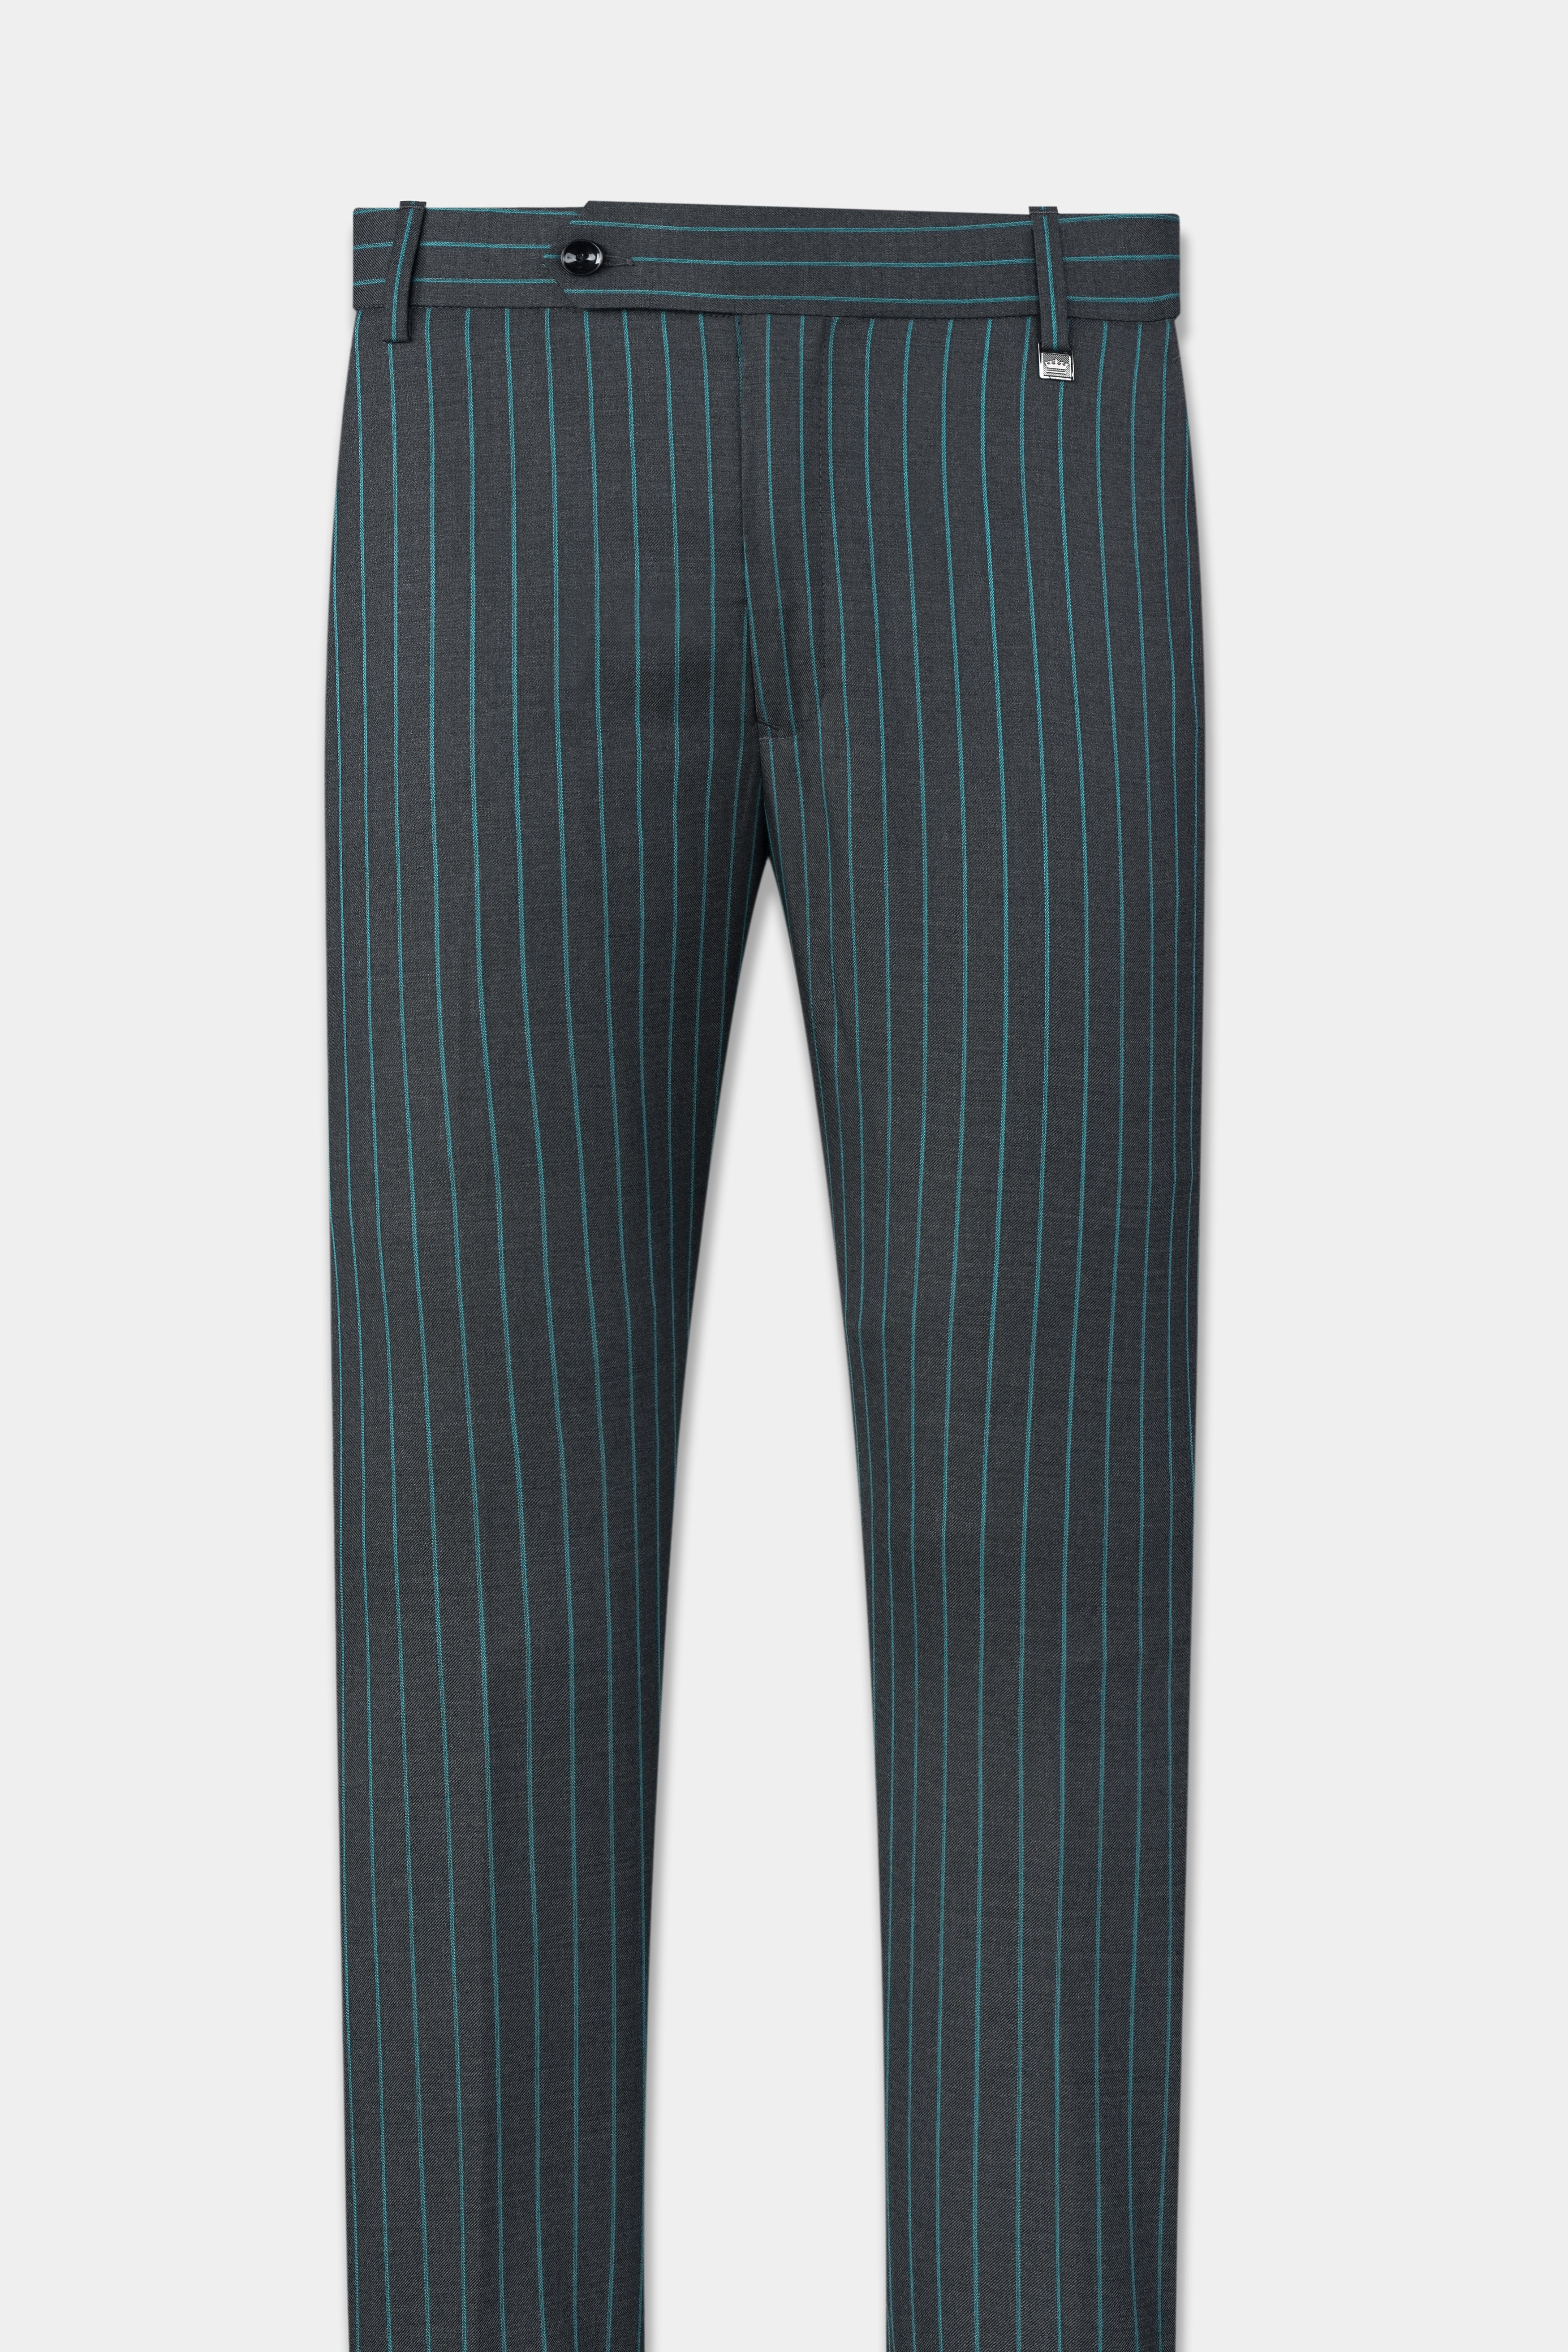 Gravel Gray and Lagoon Blue Striped Wool Rich Pant